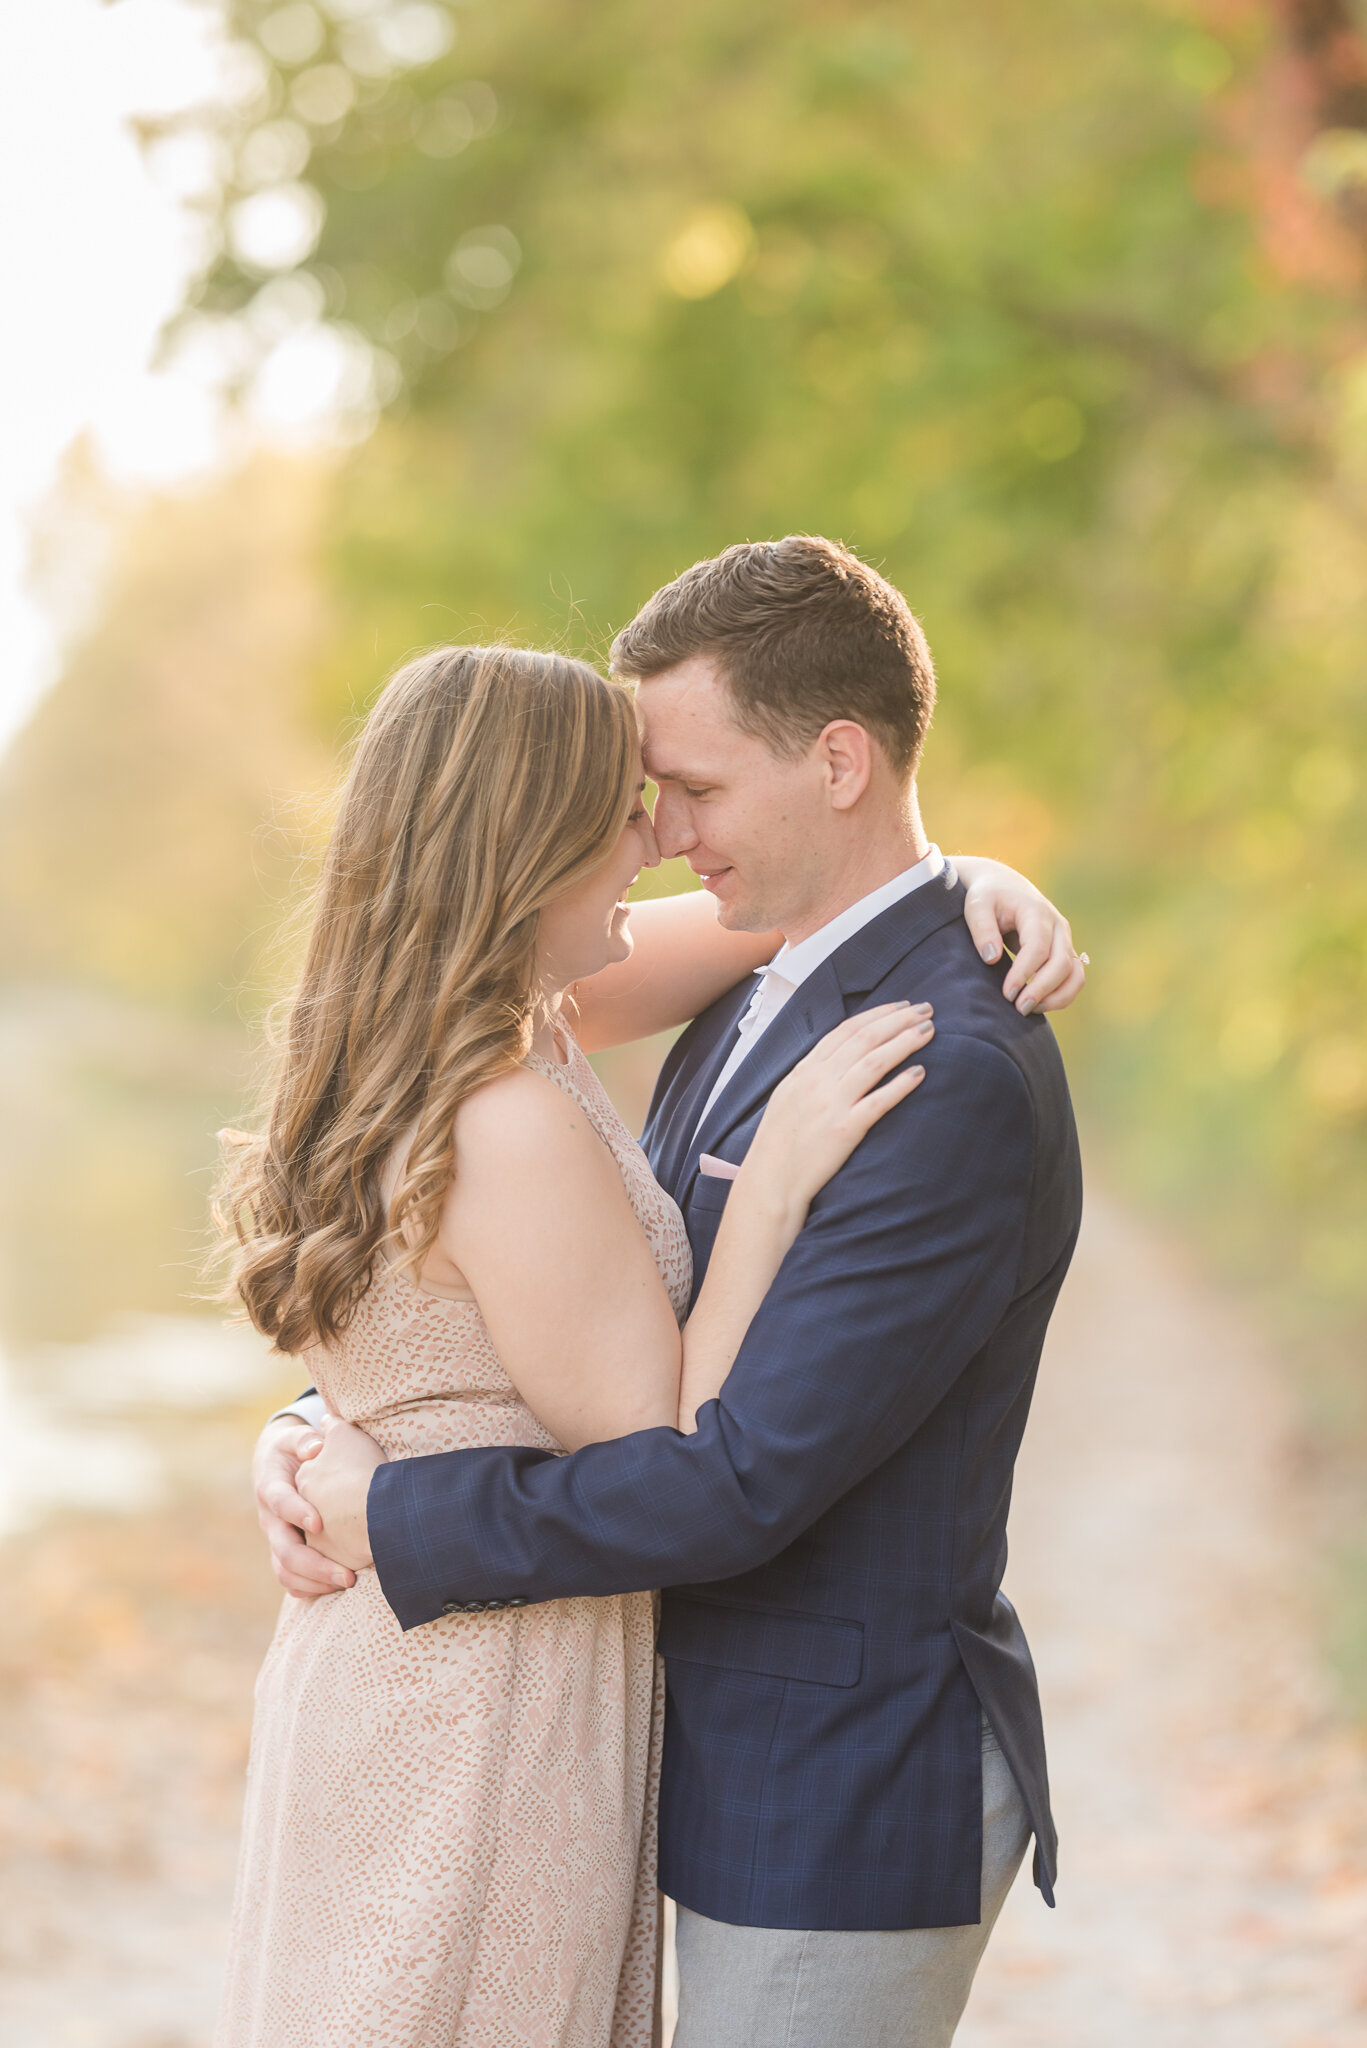 October Engagement Session at Holcomb Gardens2810.jpg